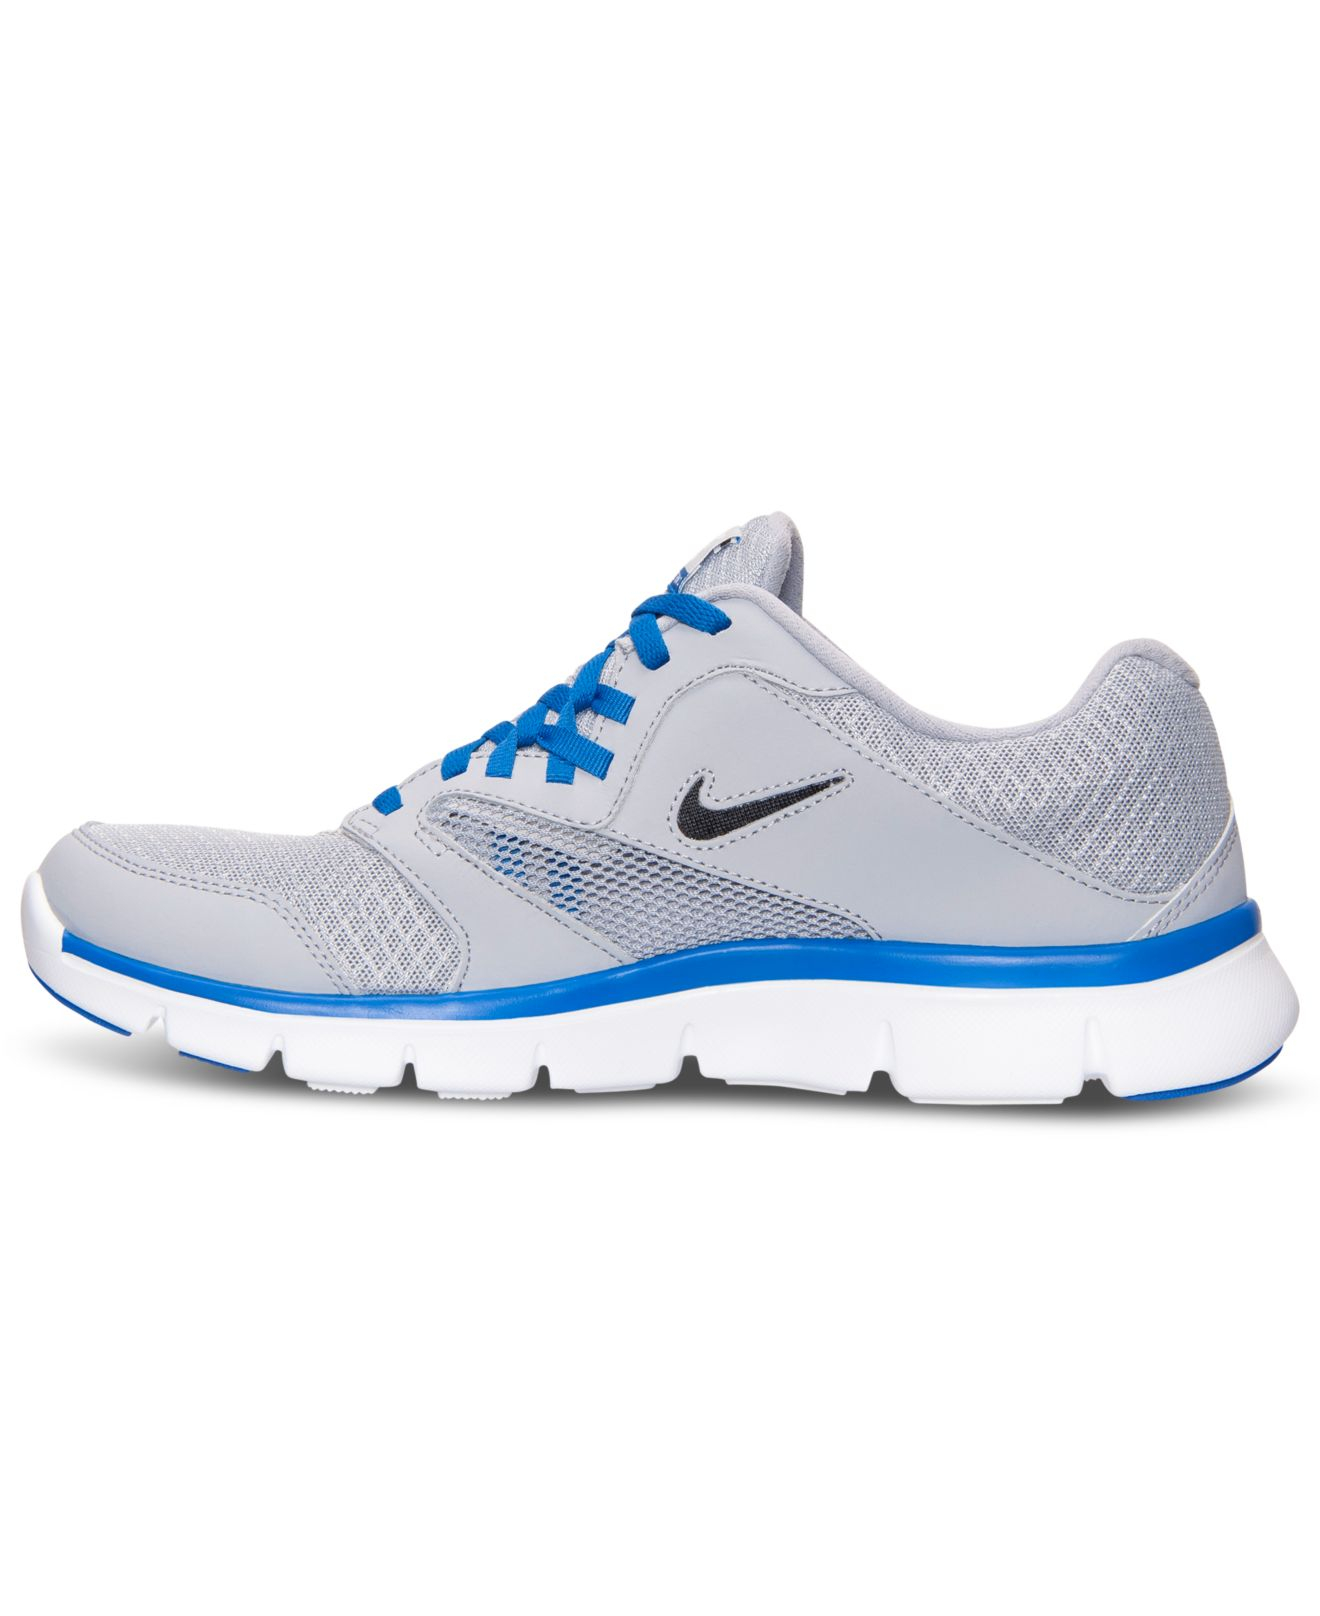 Nike Men's Flex Experience Run 3 Wide Running Sneakers From Finish Line ...